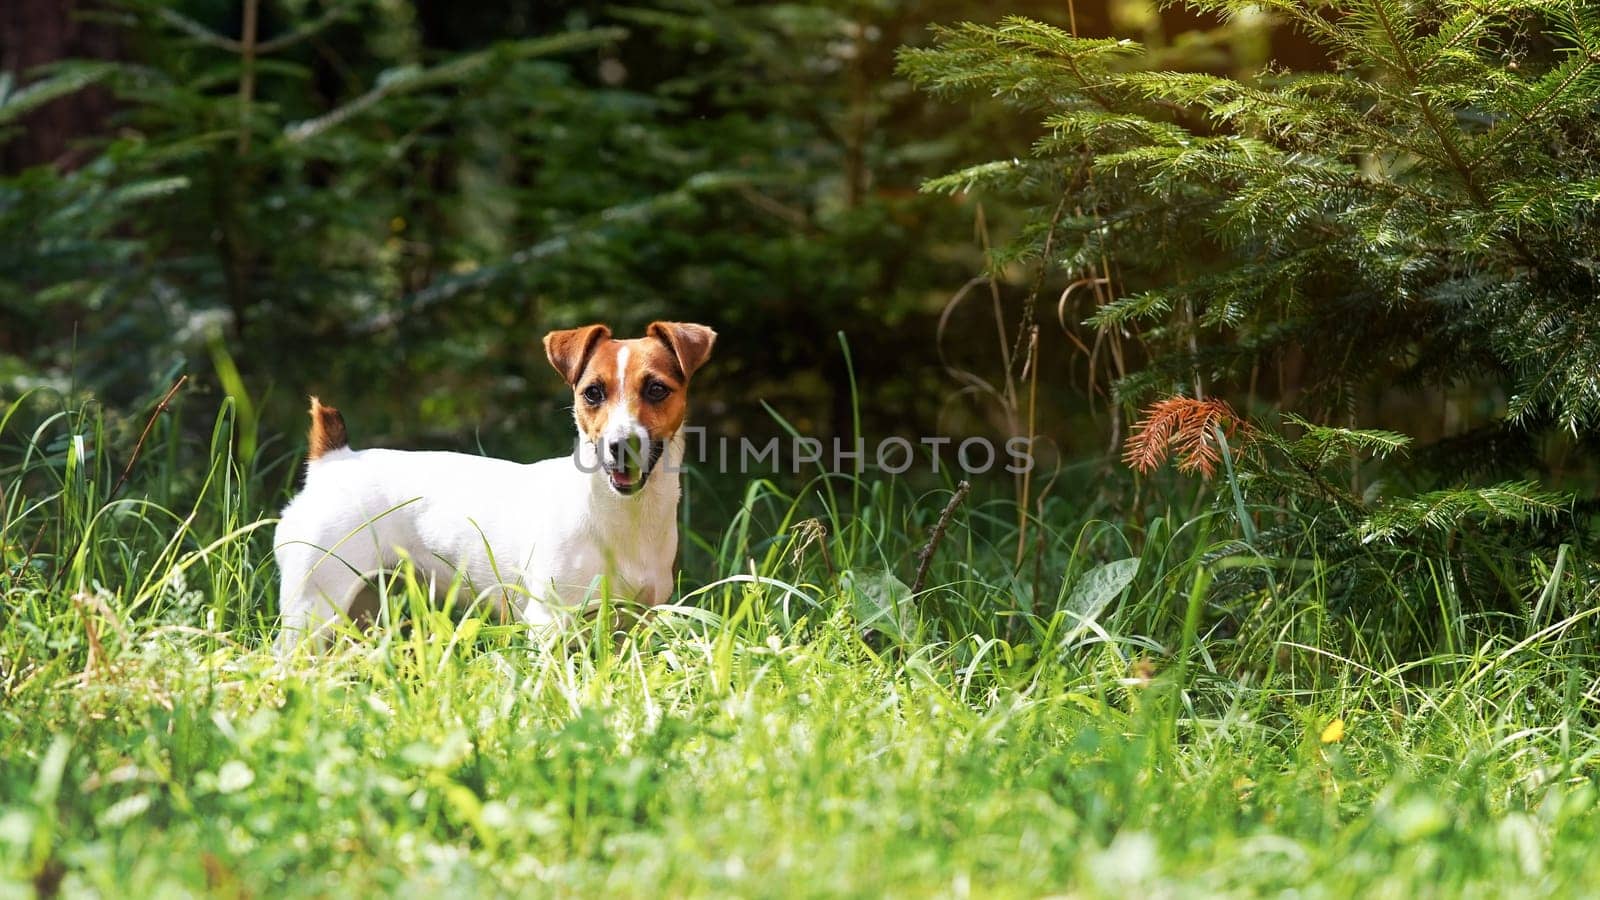 Small Jack Russell terrier standing in grass, view from side, blurred trees background by Ivanko